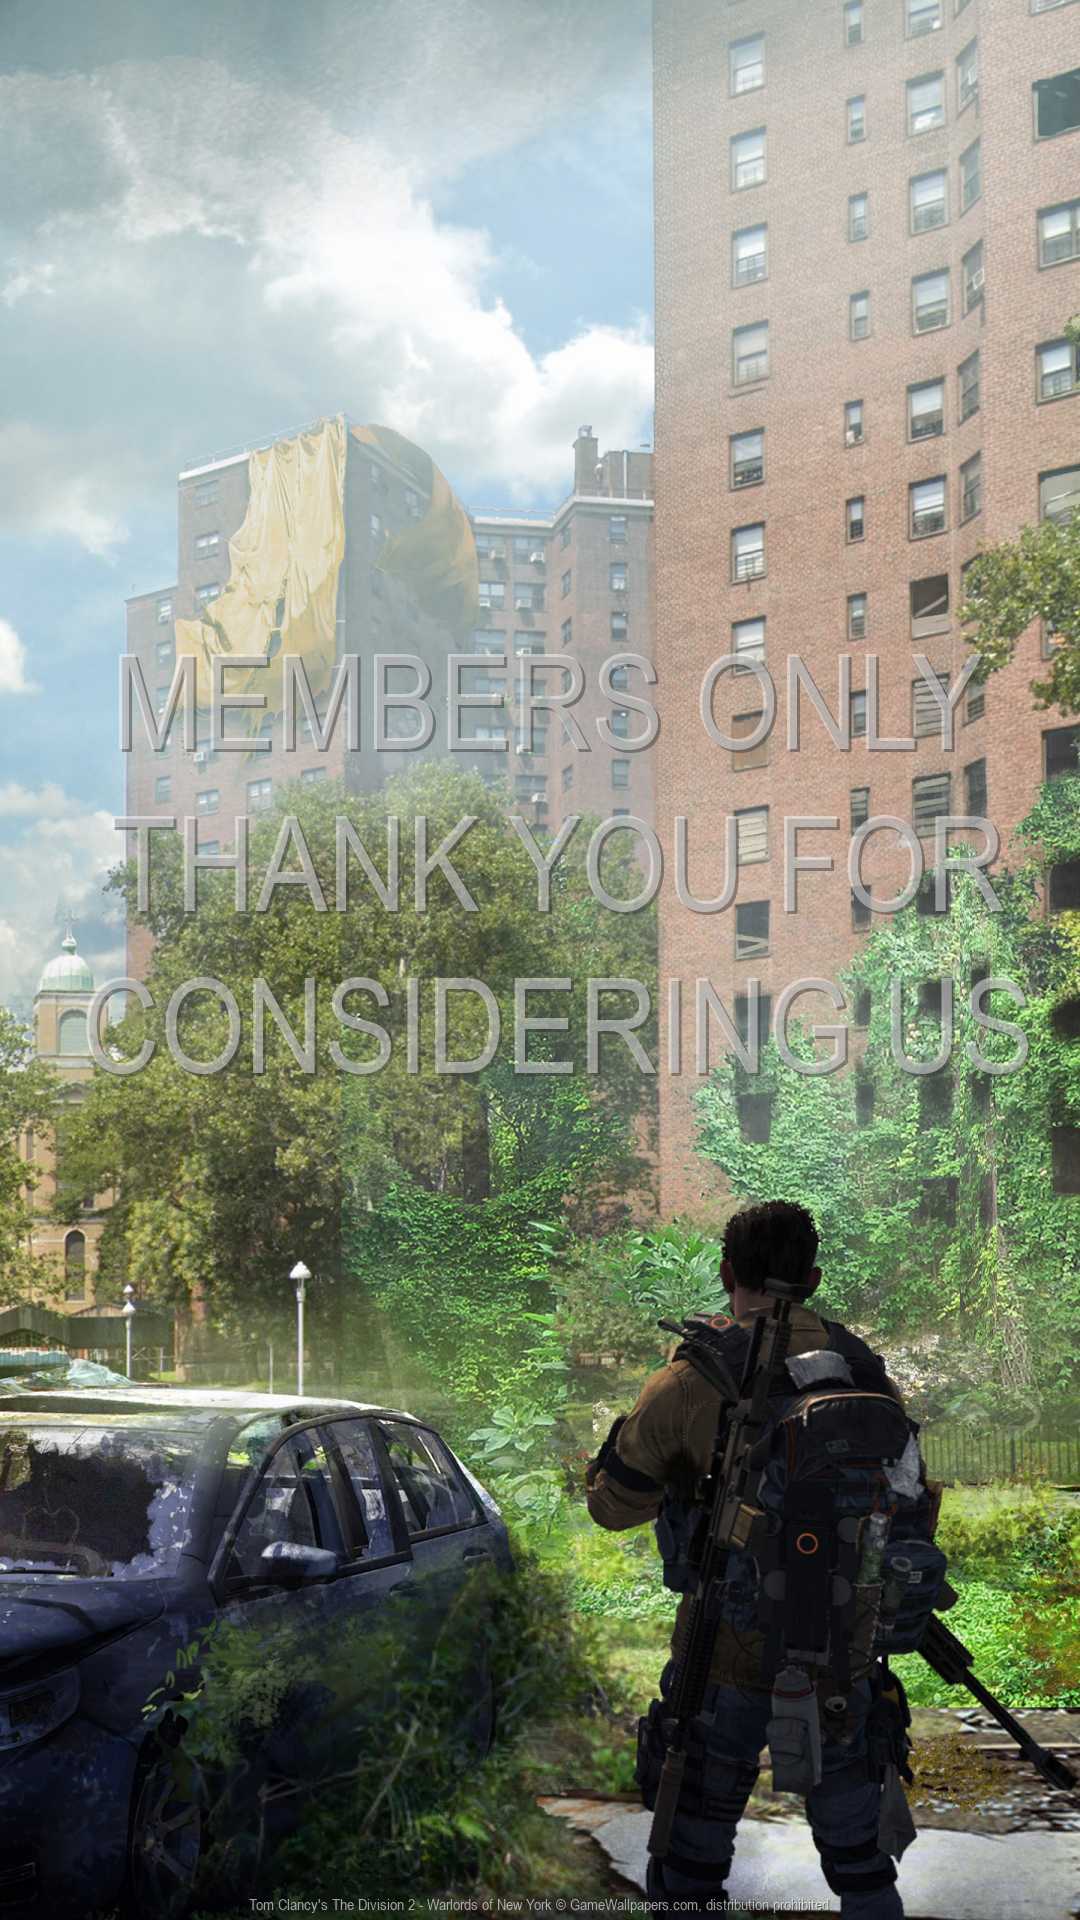 Tom Clancy's The Division 2 - Warlords of New York 1080p Vertical Mobile fond d'cran 03